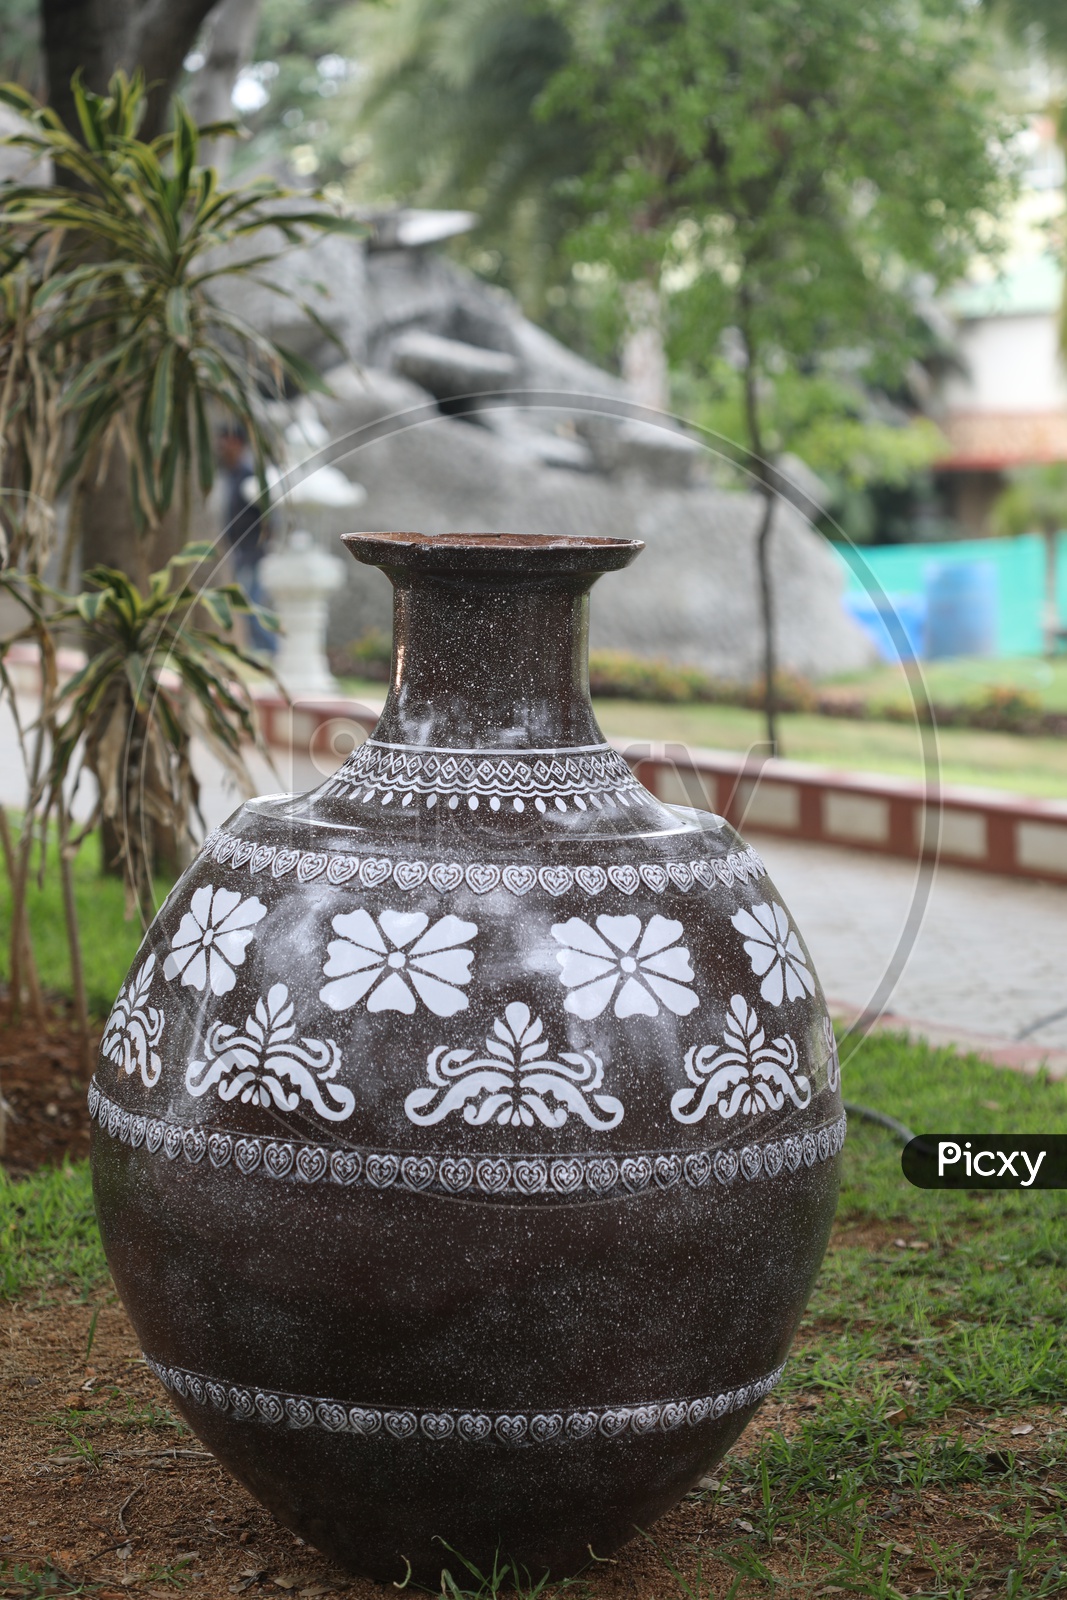 Image of a Big Pot With Design In a Lawn Of a Park-RH012108-Picxy